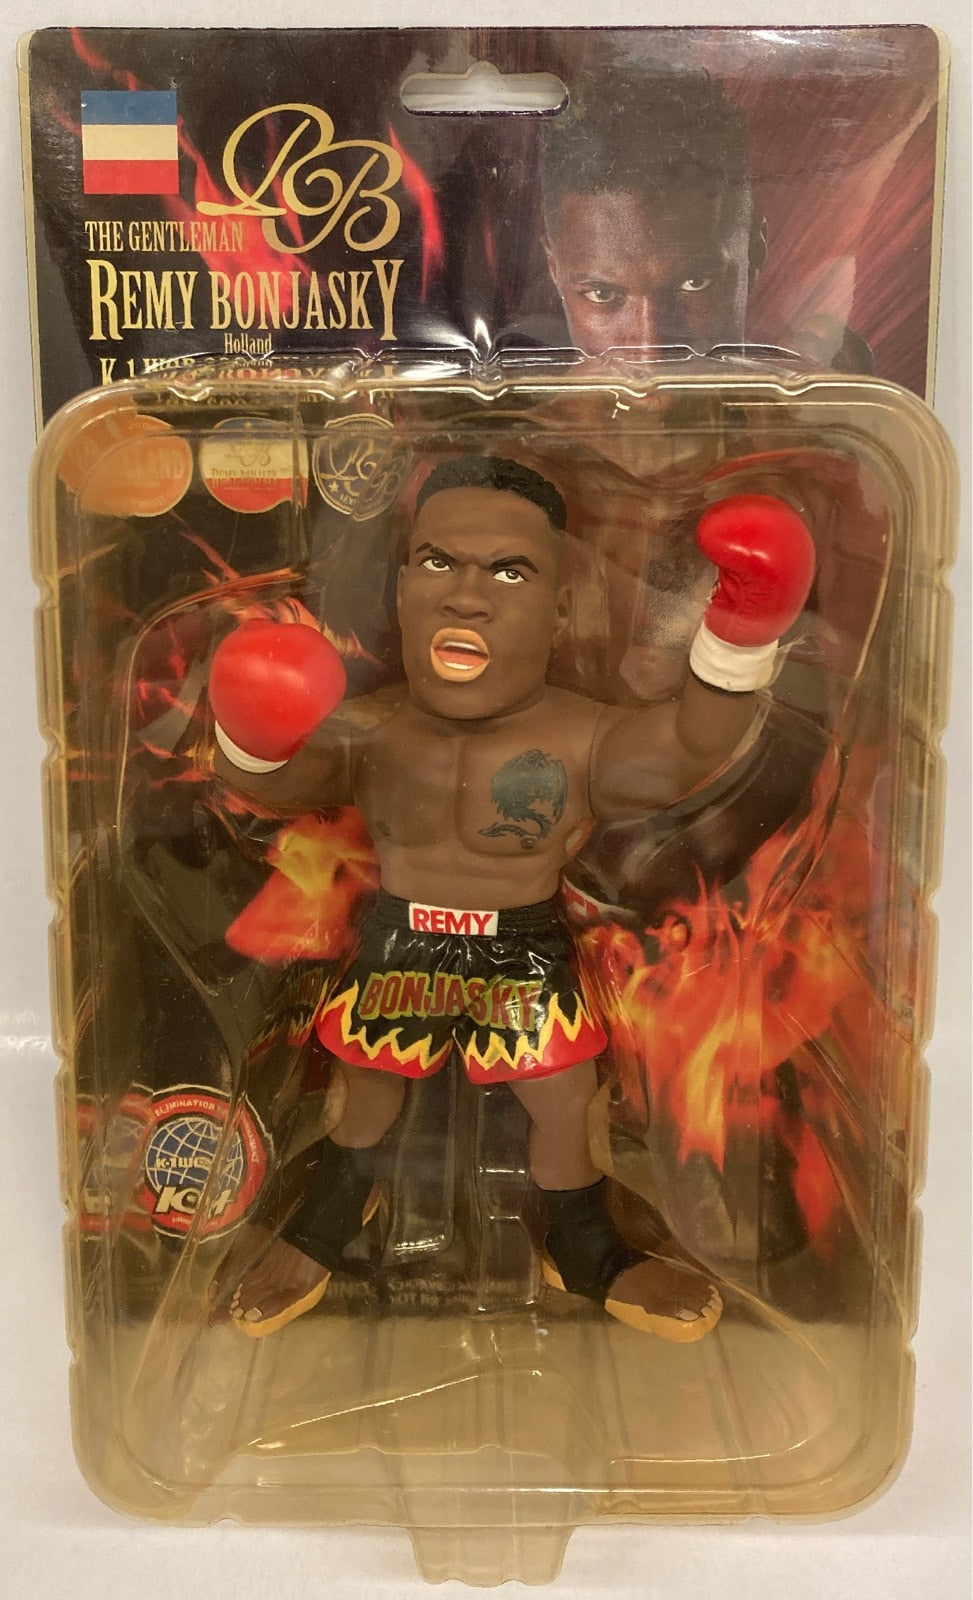 2004 K-1 HAO Collection Fighters Figure Limited Model “The Gentleman” Remy Bonjasky